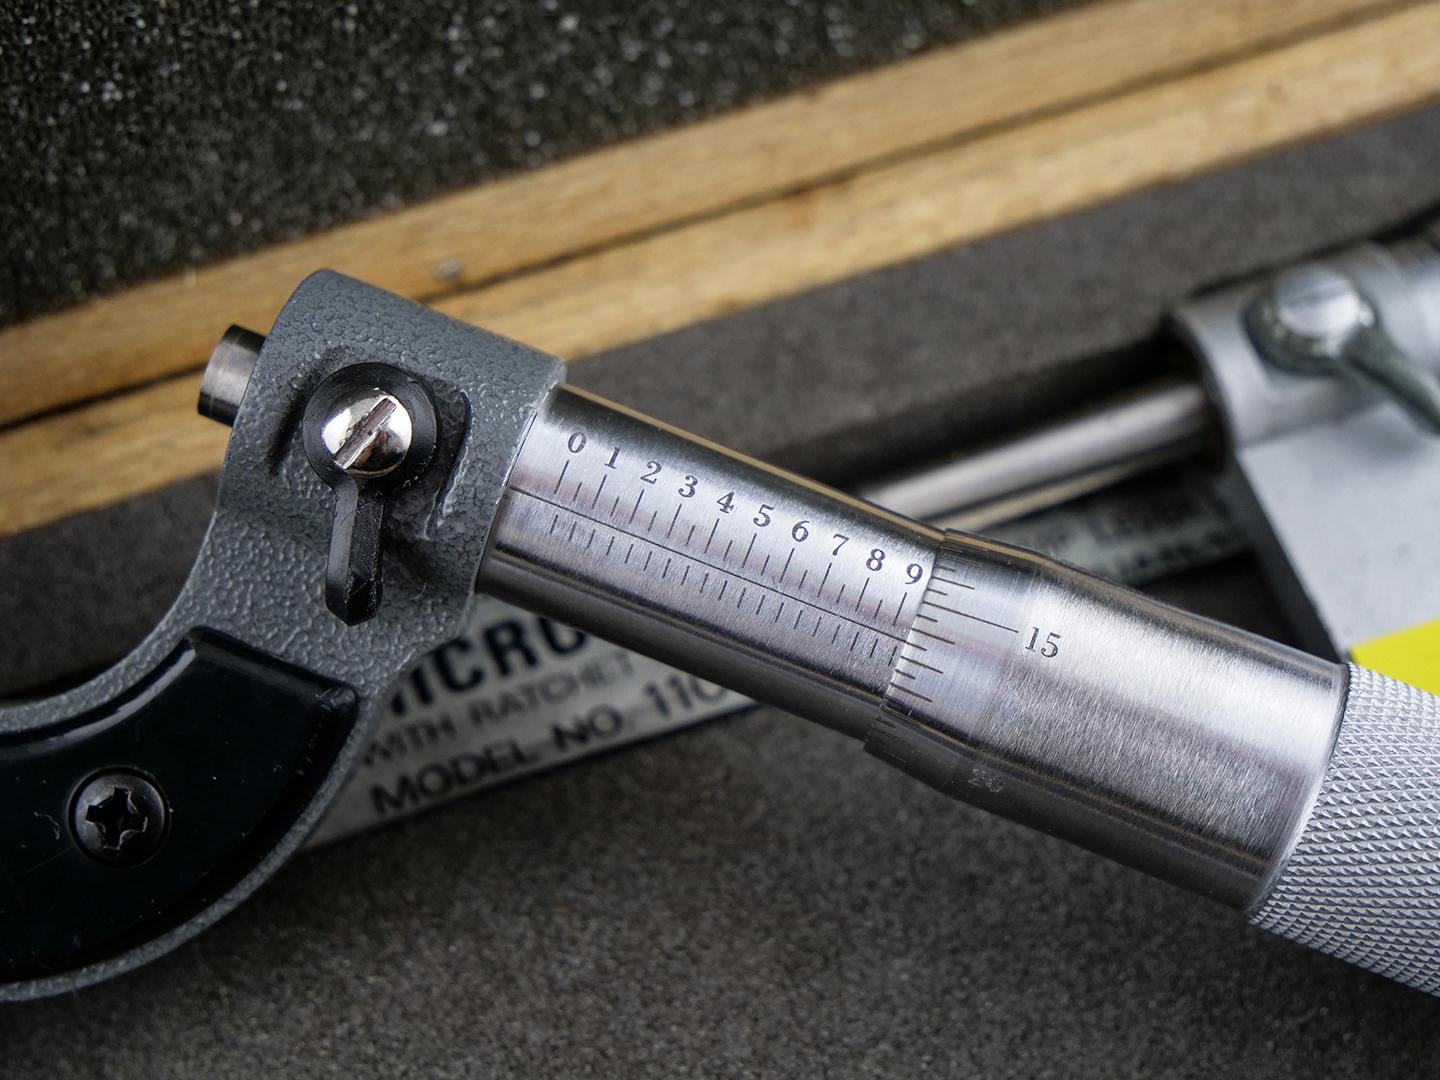 A micrometer engraved